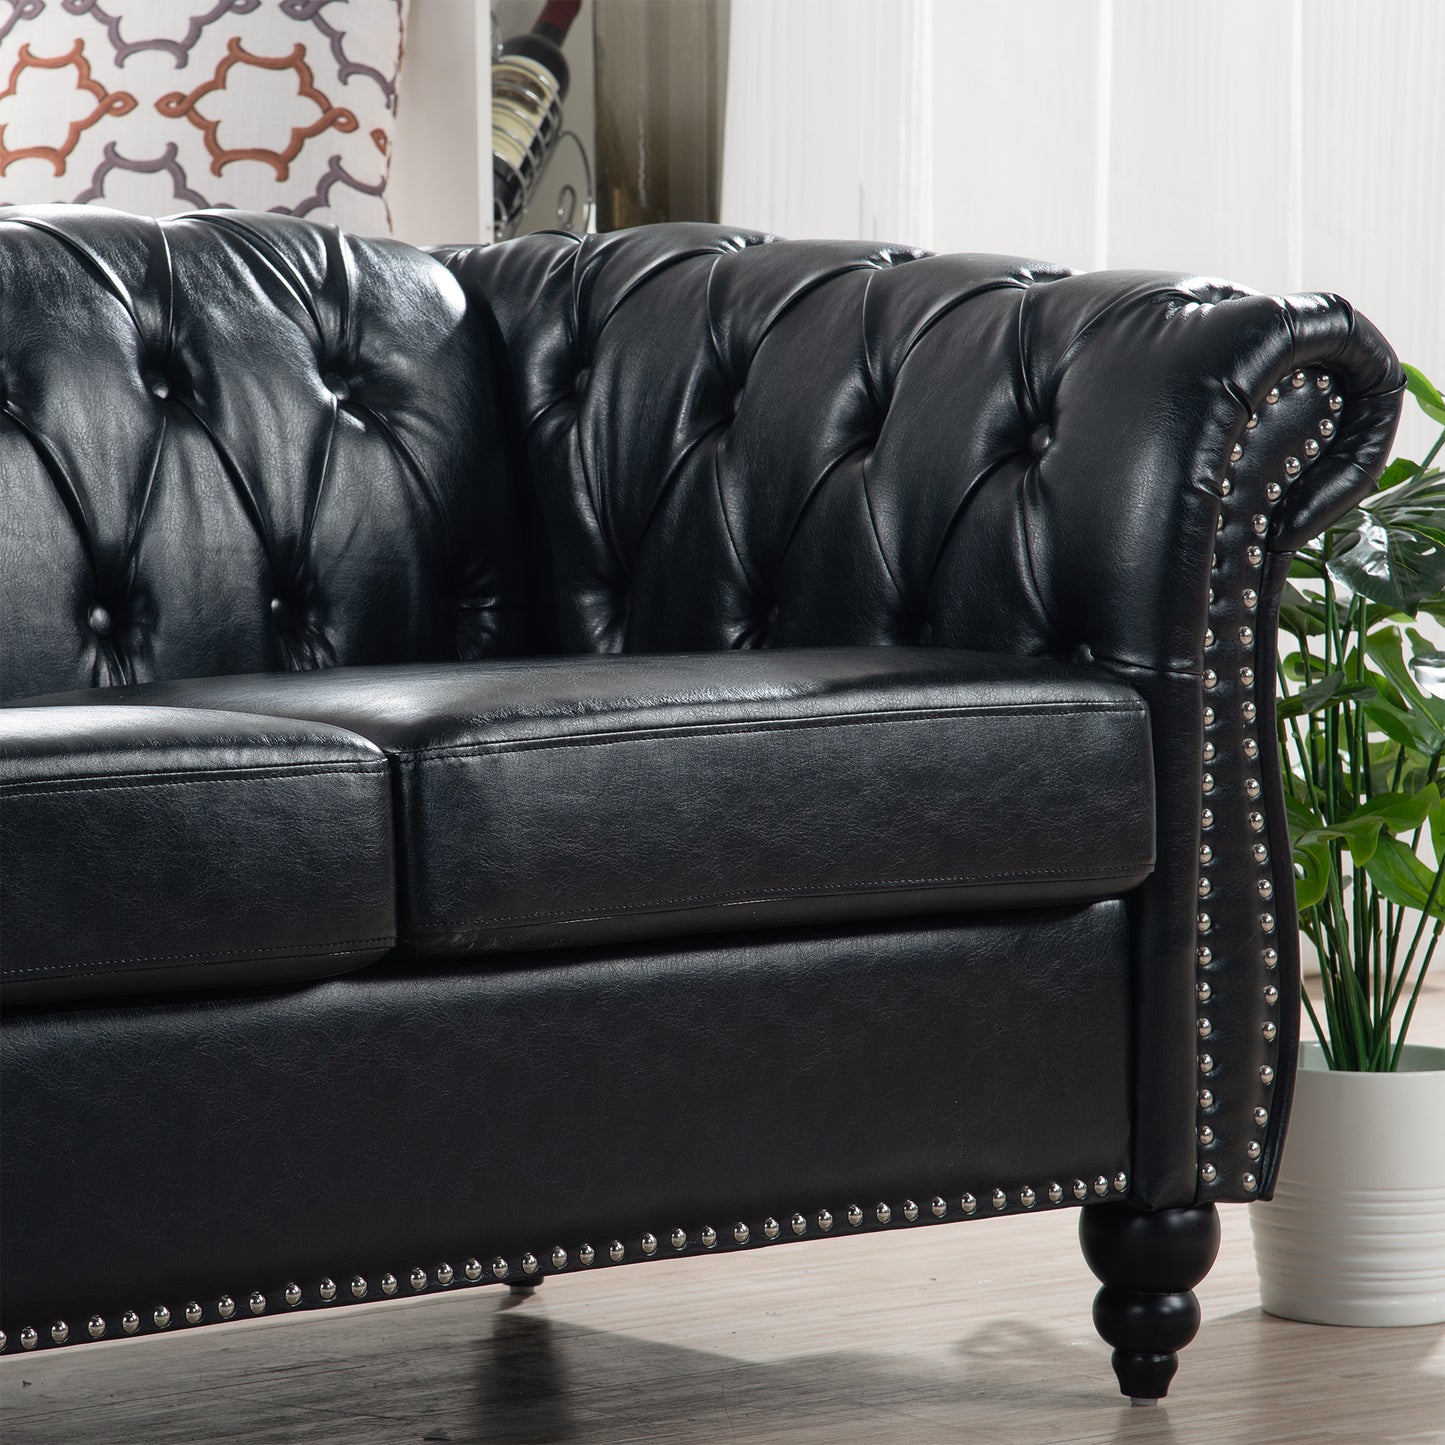 Chesterfield Three Seater Sofa in Black Leather